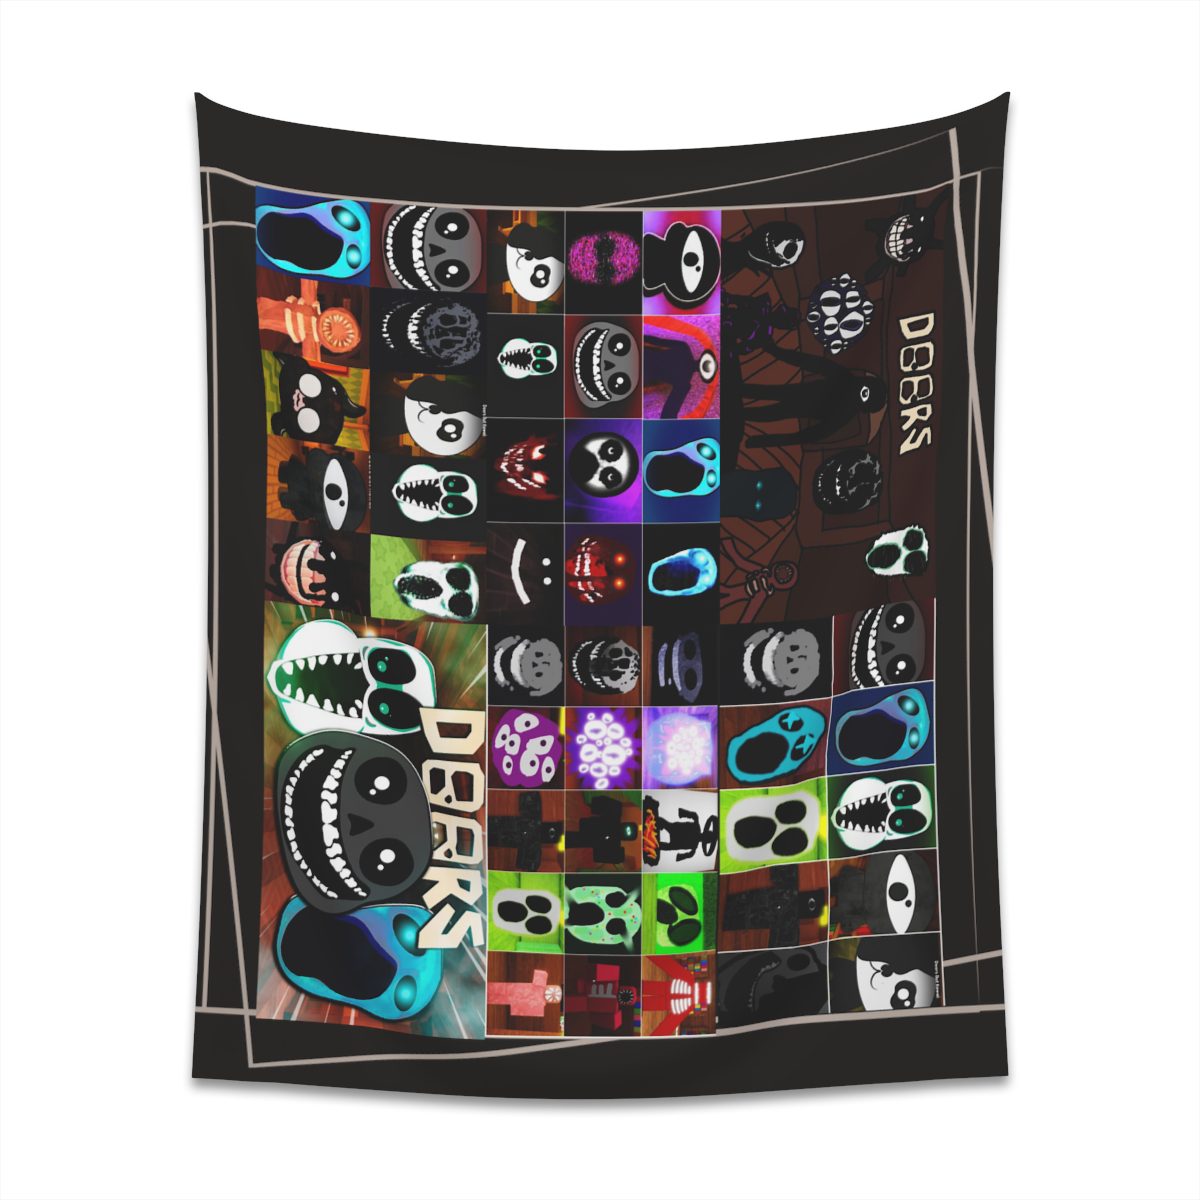 Invite your friends to a terrifying Halloween party with the DOOR ROBLOX horror tapestries.  Printed Wall Tapestry Cool Kiddo 36